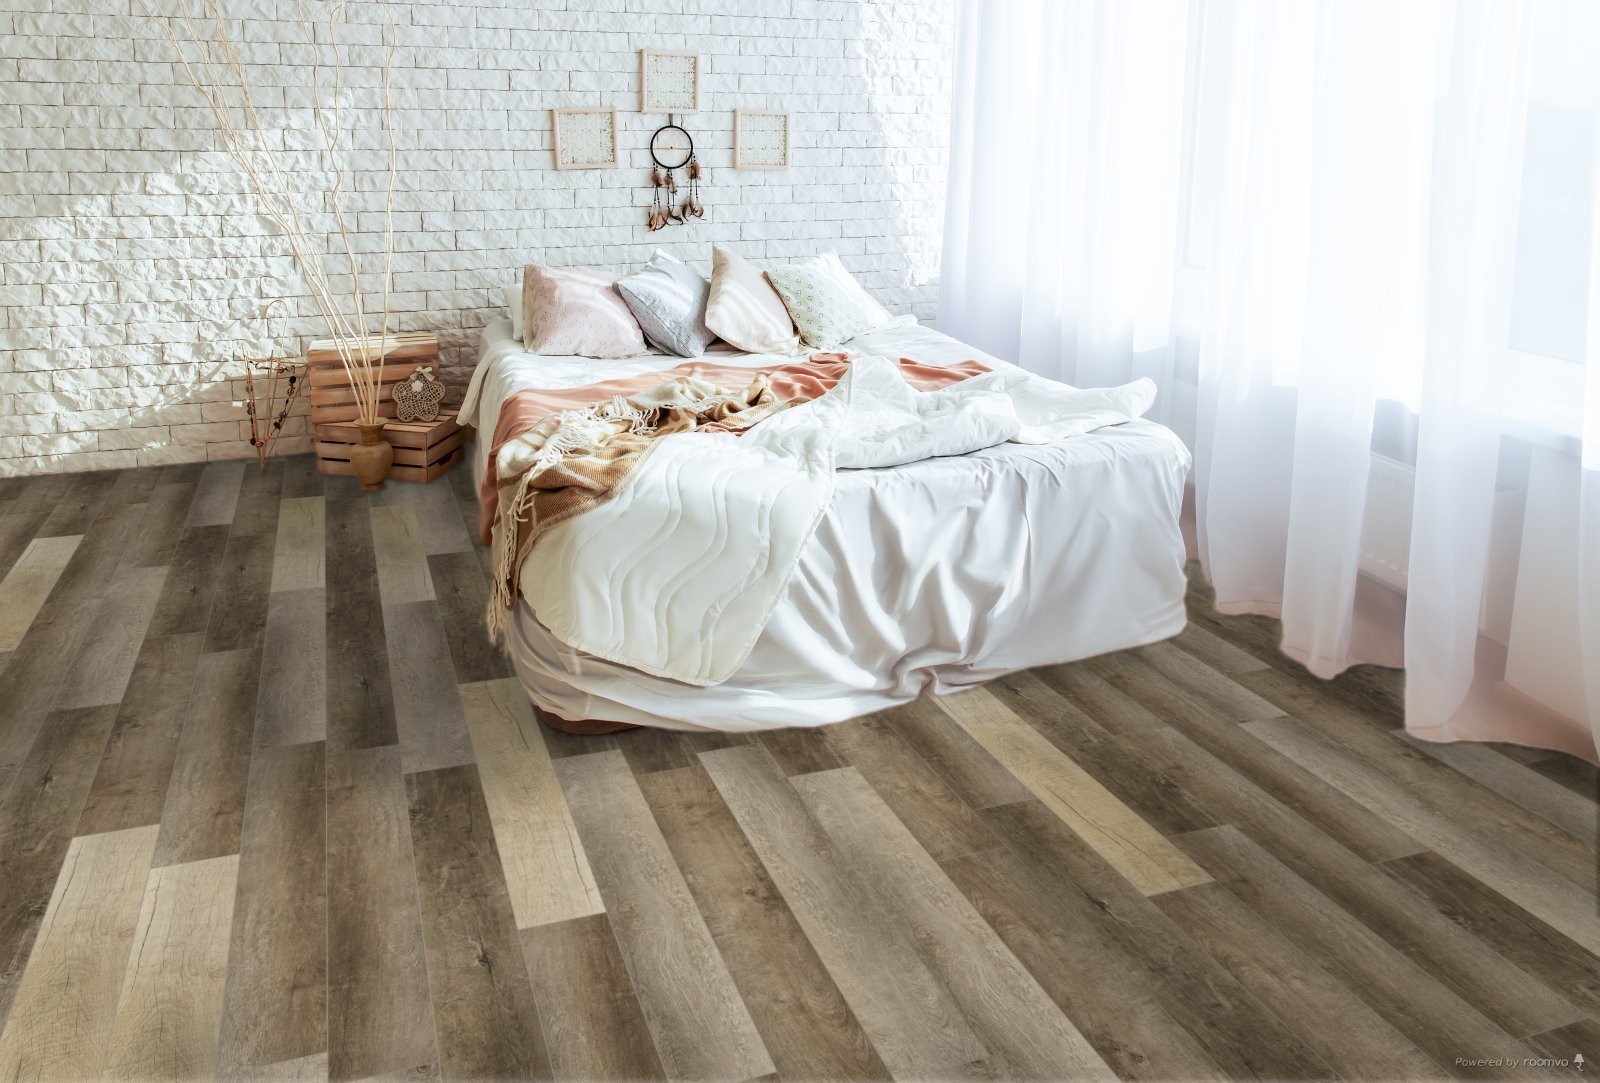 Horizen Flooring presents to you a picture of a quality wide plank Whiteville luxury vinyl plank. NovoCore Q Merengue collection features a wide range of colors & designs that will compliment any interior. Natural wood grain synchronized surface allow for an authentic hardwood look & feel. This collection features a 0.3″ / 7.5 mm overall thickness and a durable 22 mil / 0.55 mm wear layer for residential and commercial applications.